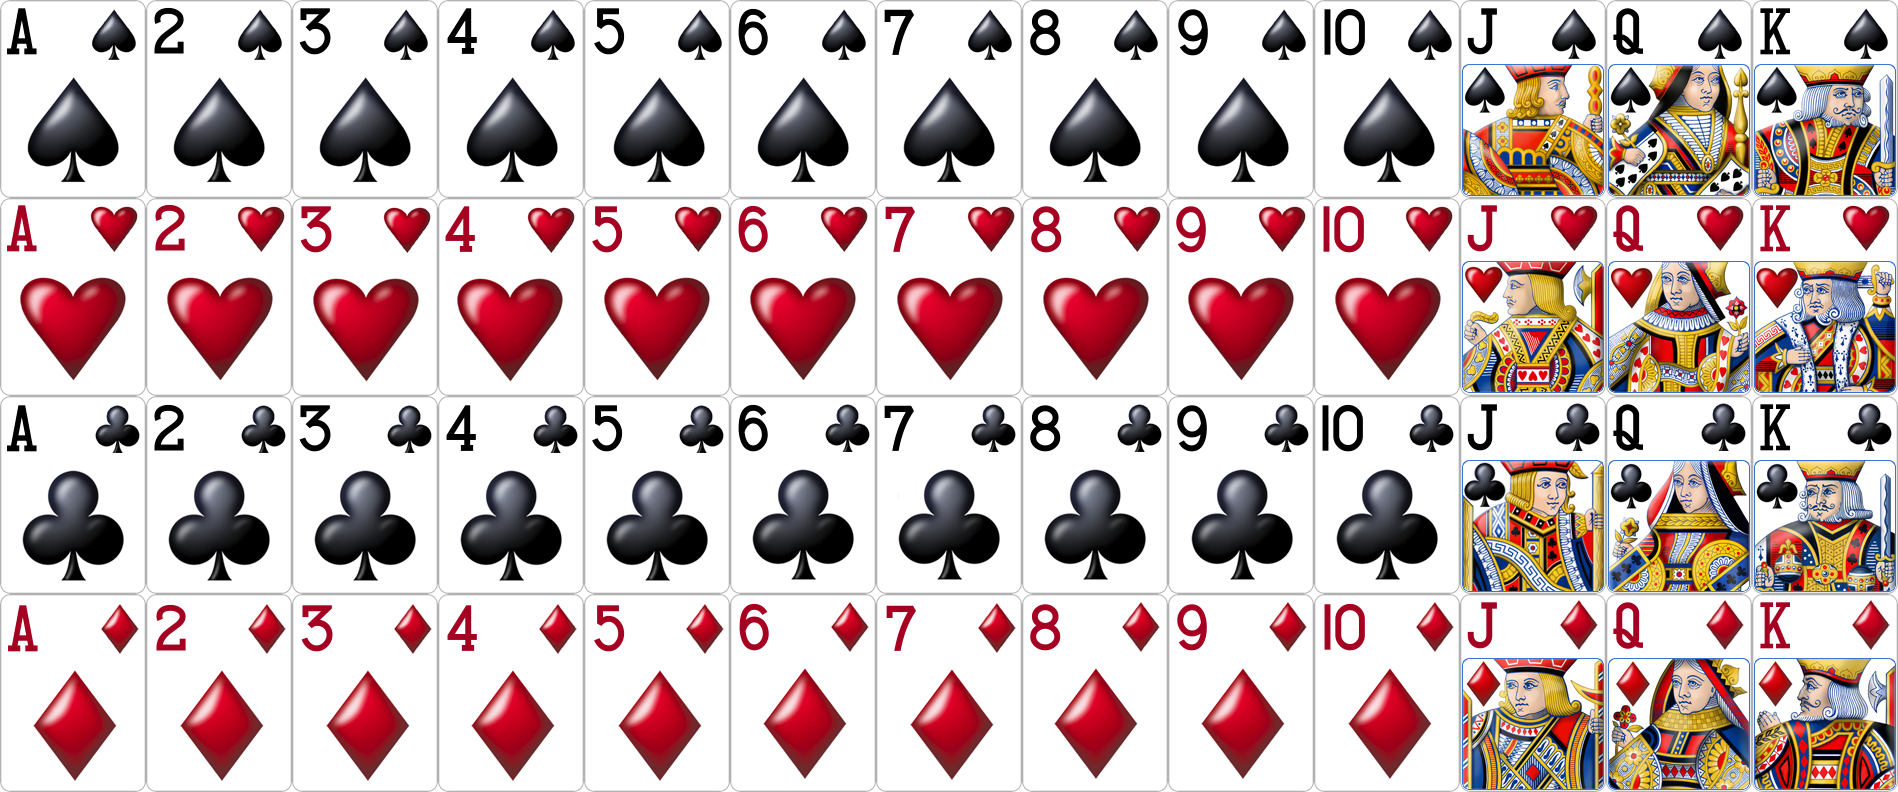 SOLITAIRE - Play Online for Free!